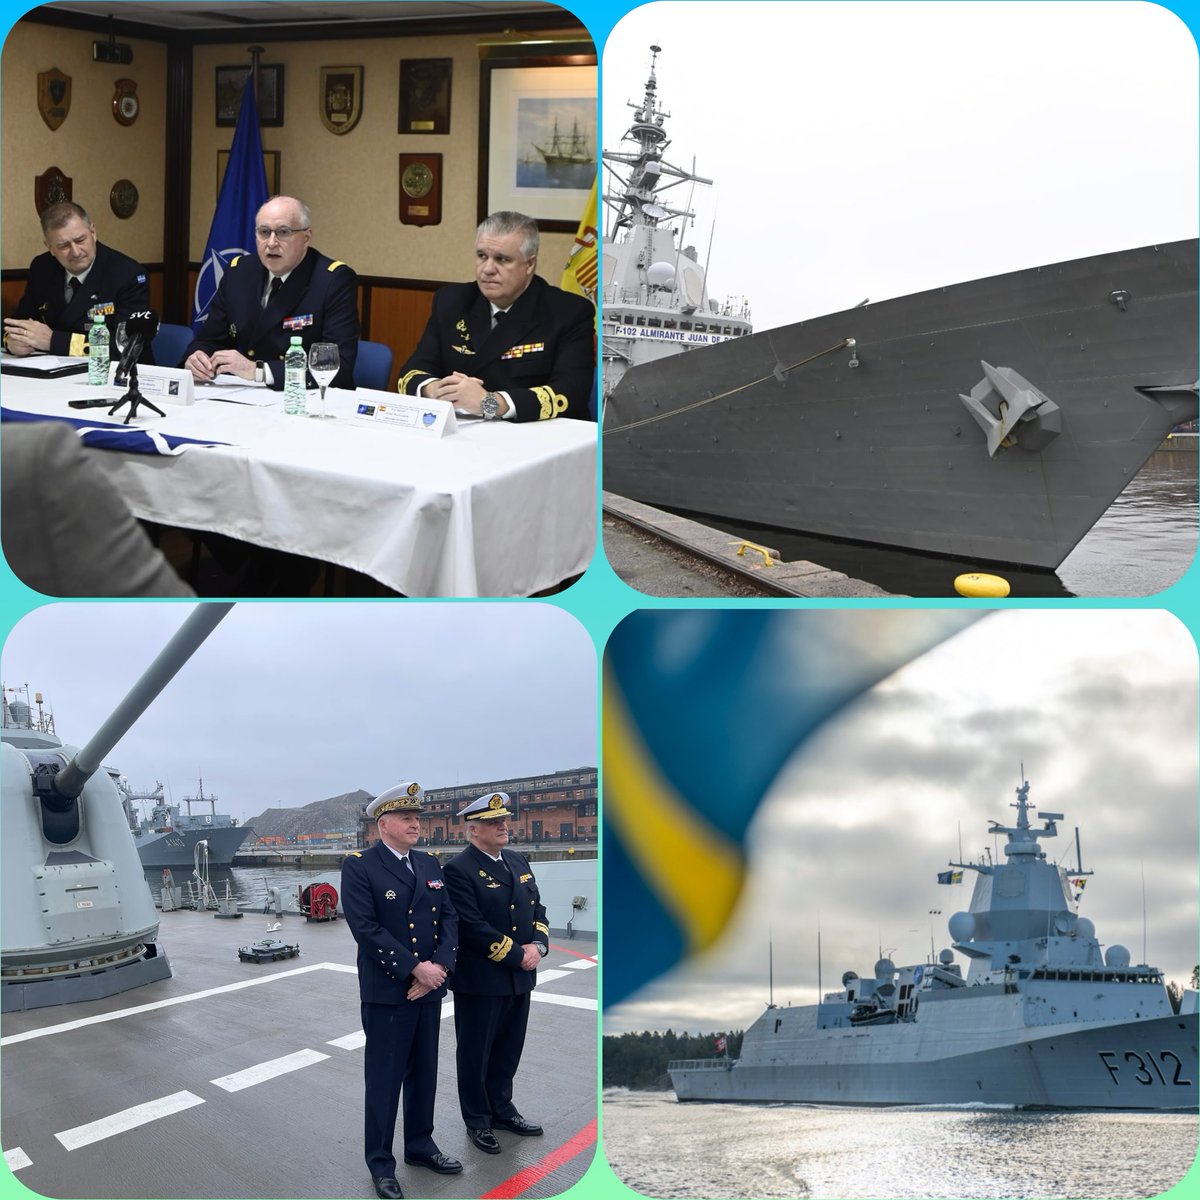 This past week, ships assigned to @COM_SNMG1 paid a historic port visit to Sweden 🇸🇪- the first since becoming a NATO member March 7. #StrongerTogether #DeterAndDefend